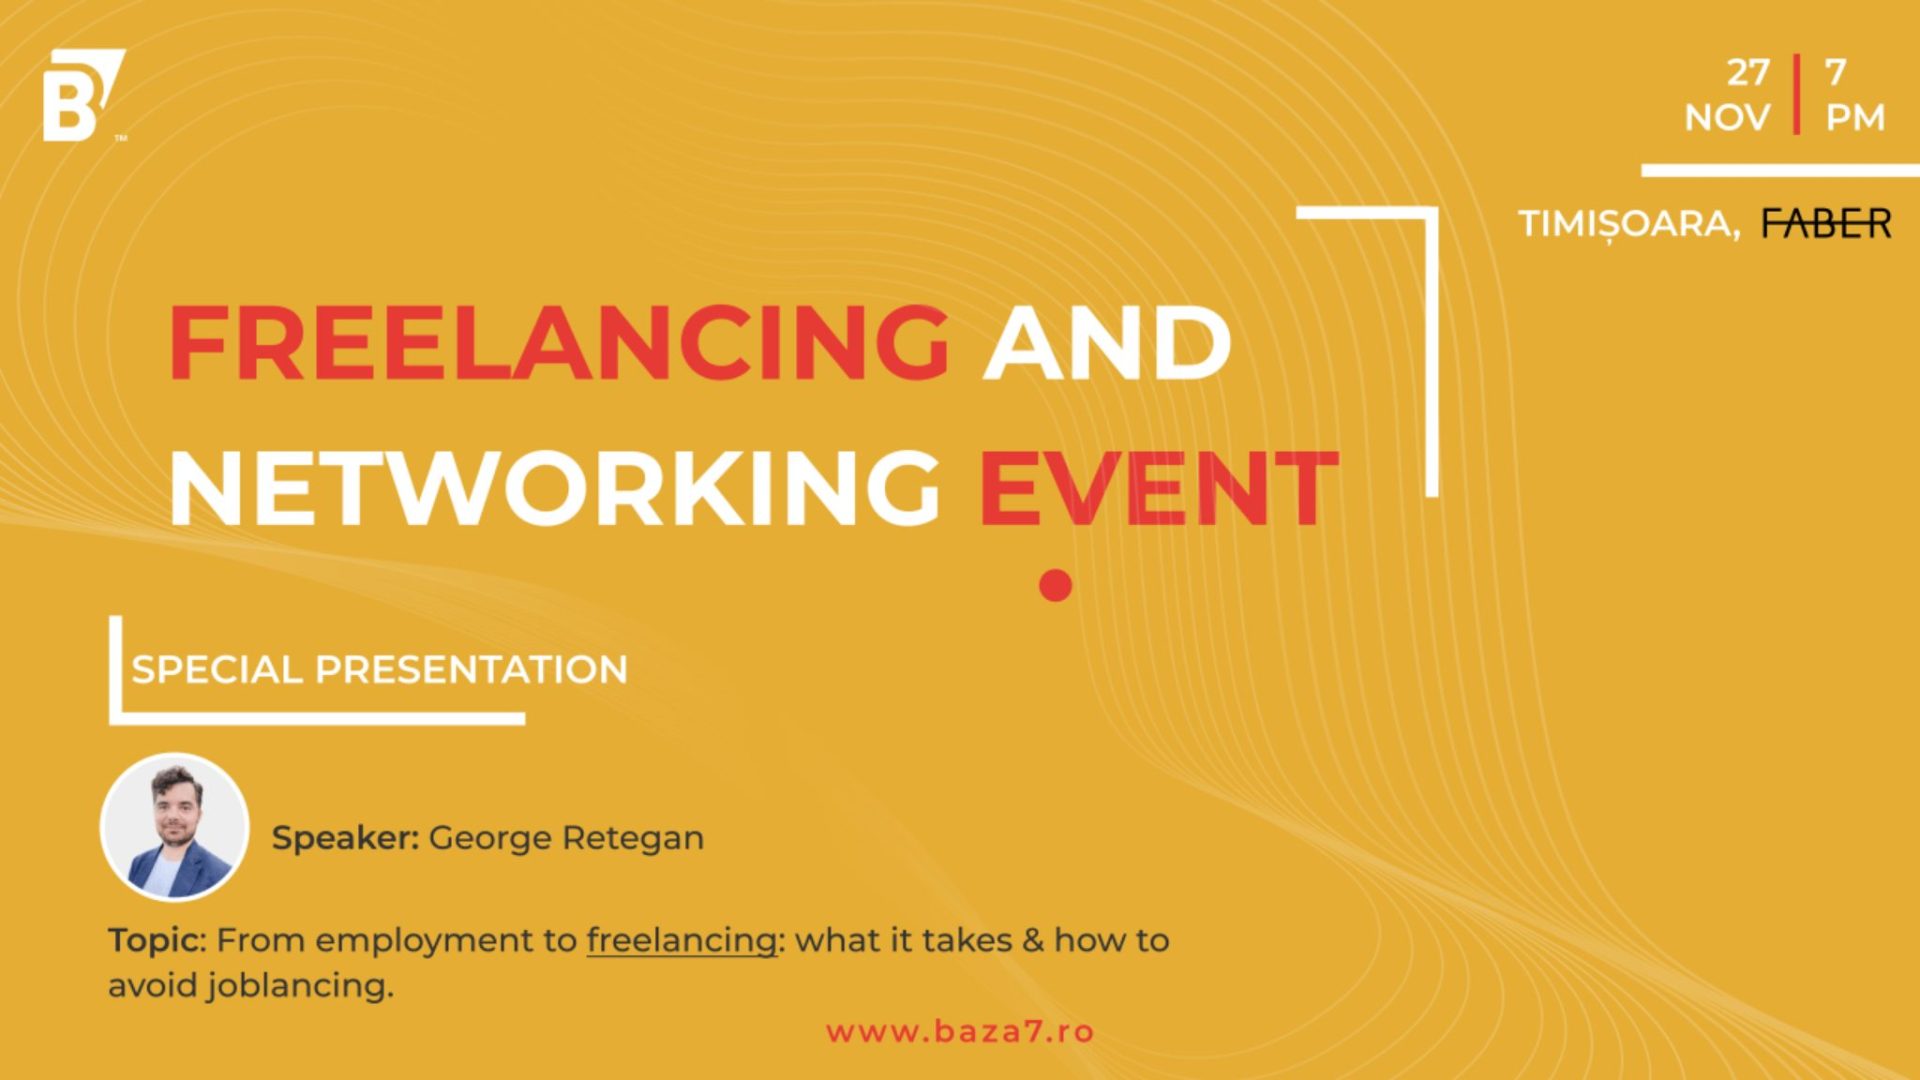 Freelancing and Networking